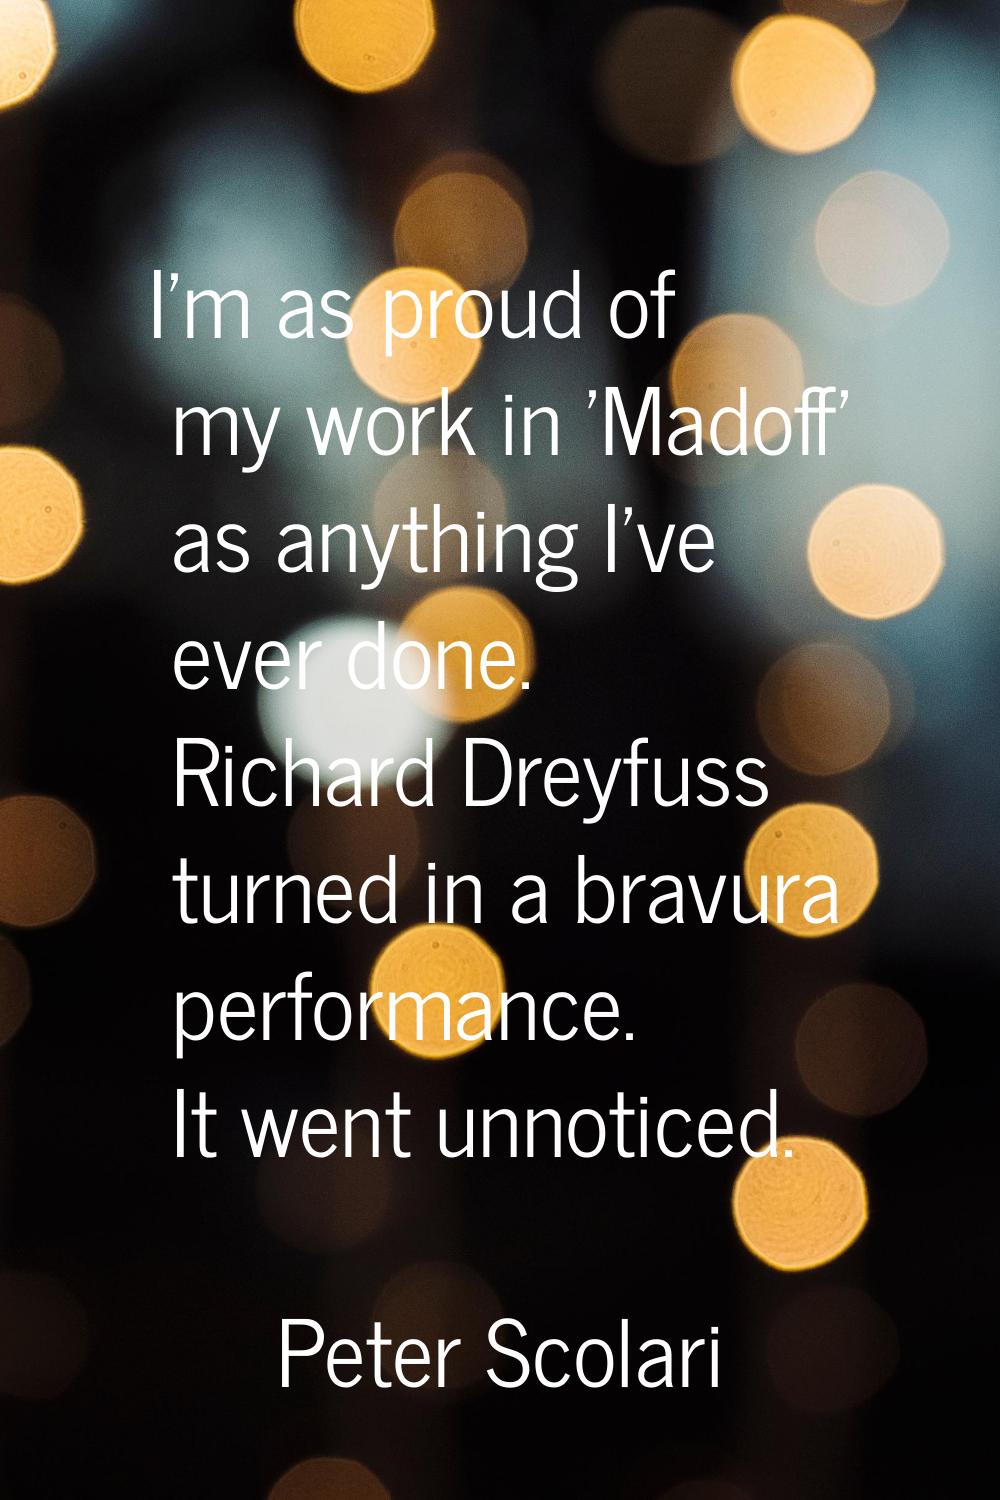 I'm as proud of my work in 'Madoff' as anything I've ever done. Richard Dreyfuss turned in a bravur